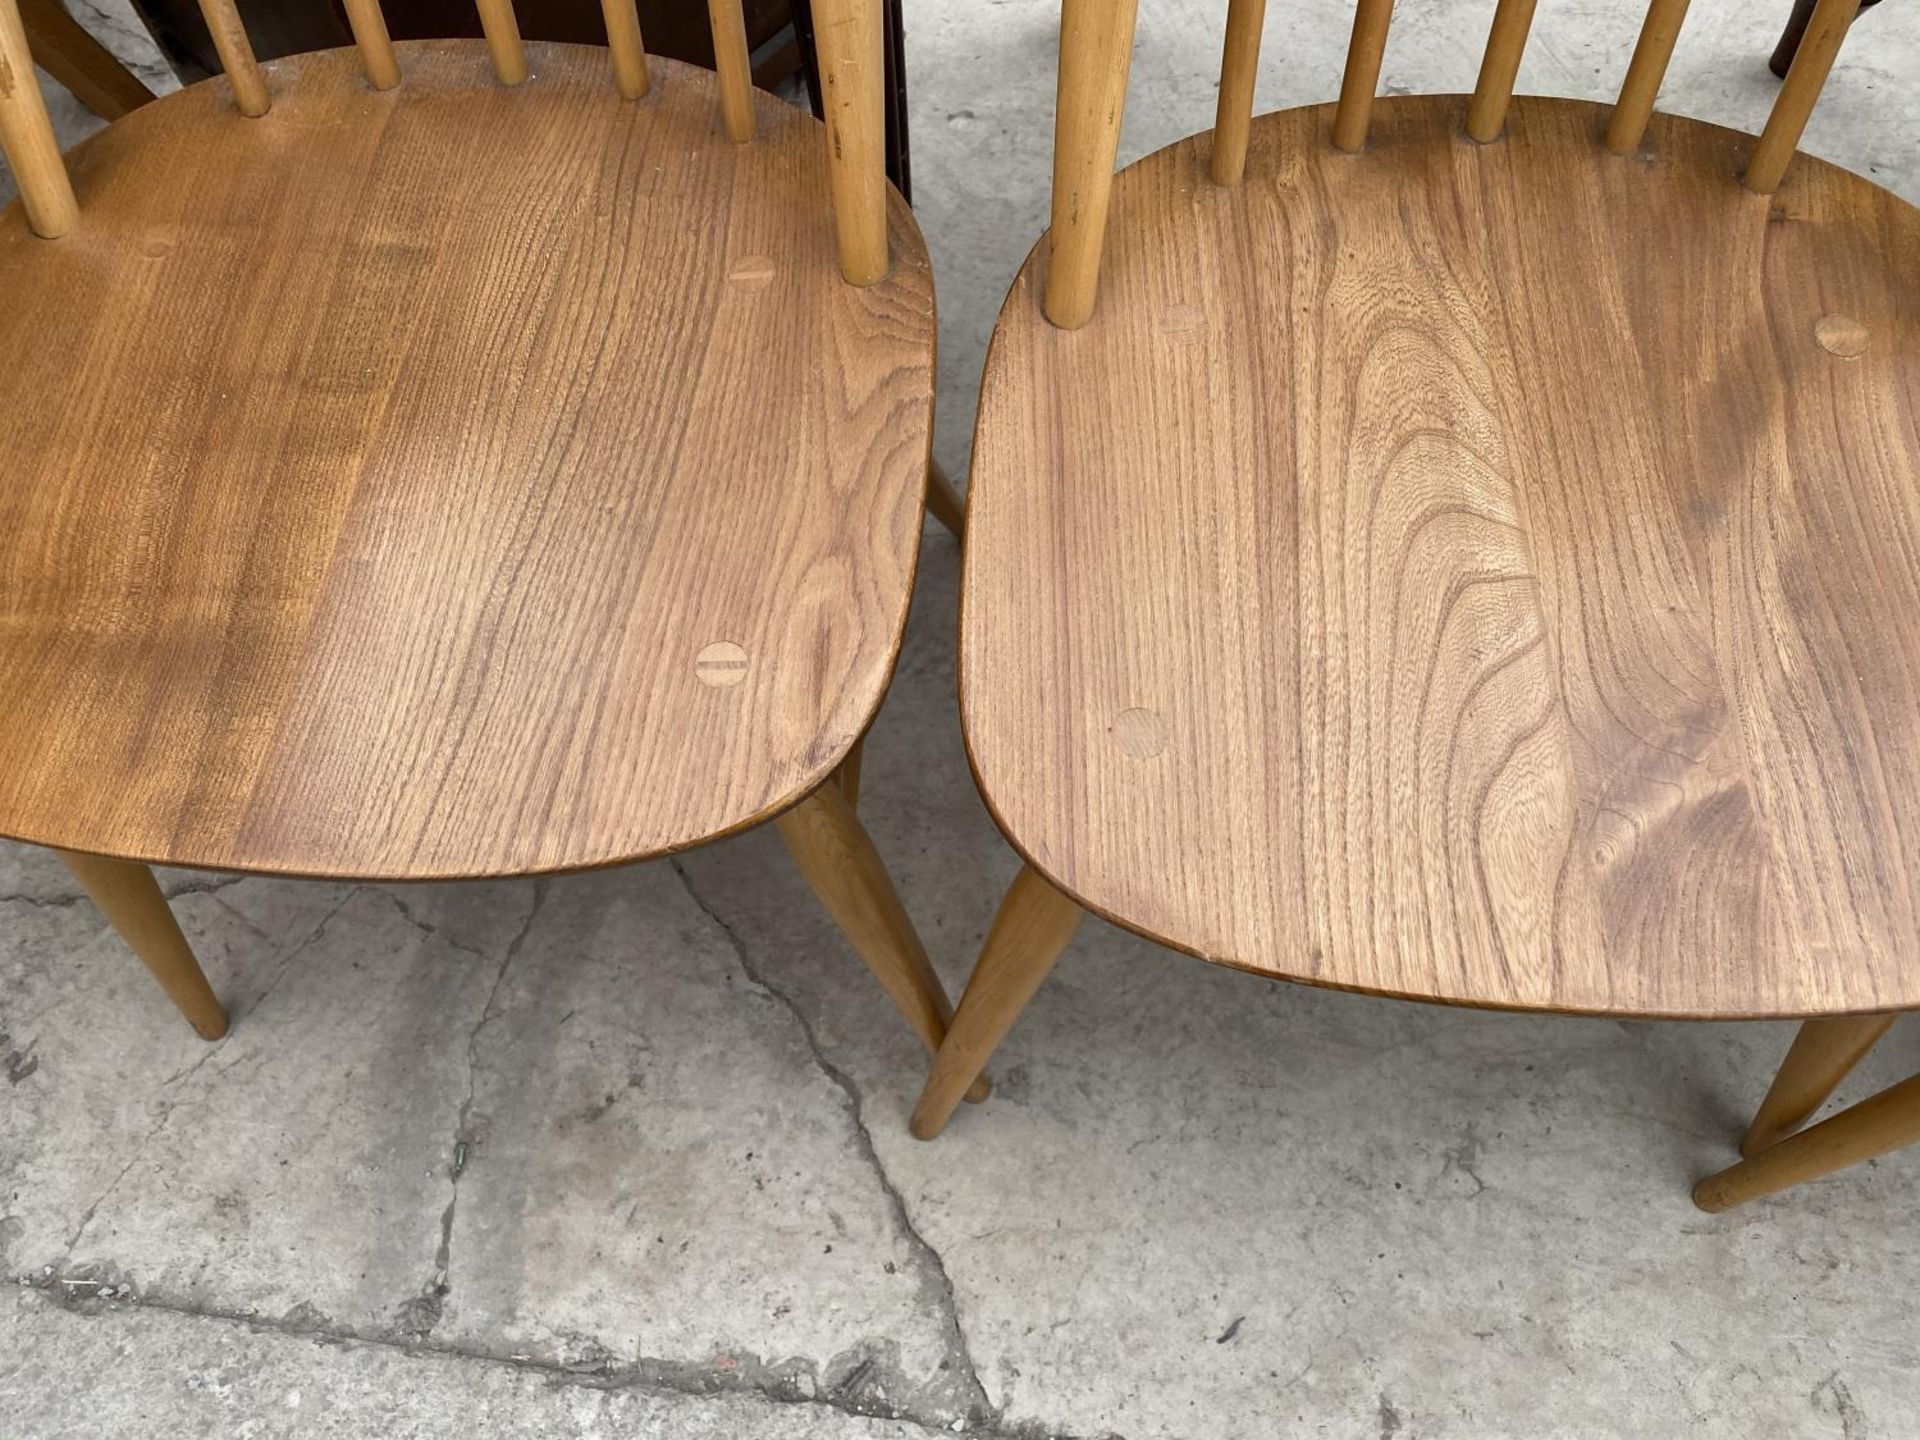 FOUR ERCOL ELM AND BEECH DINING CHAIRS - Image 3 of 8